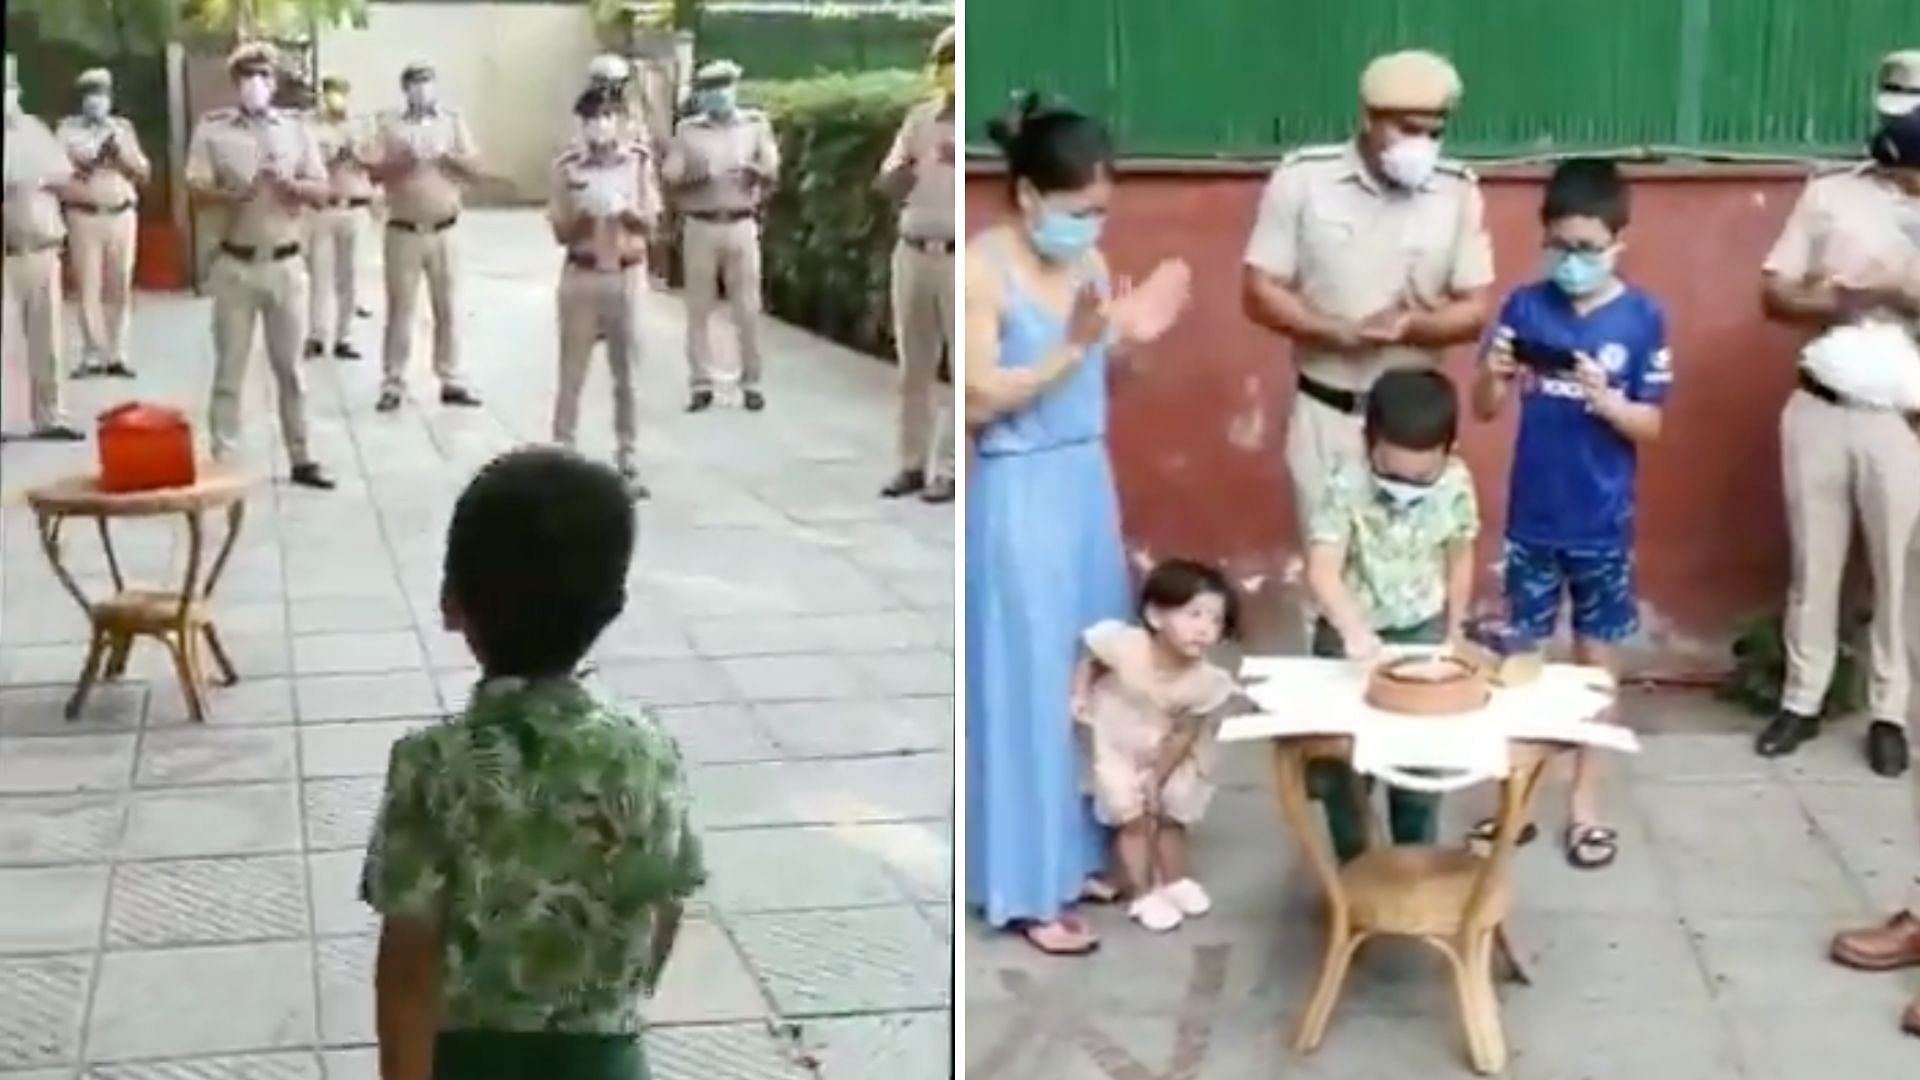 Mary Kom thanked Delhi Police for making her son’s birthday “special” after officers came to her home with a cake to mark Prince Kom’s birthday.